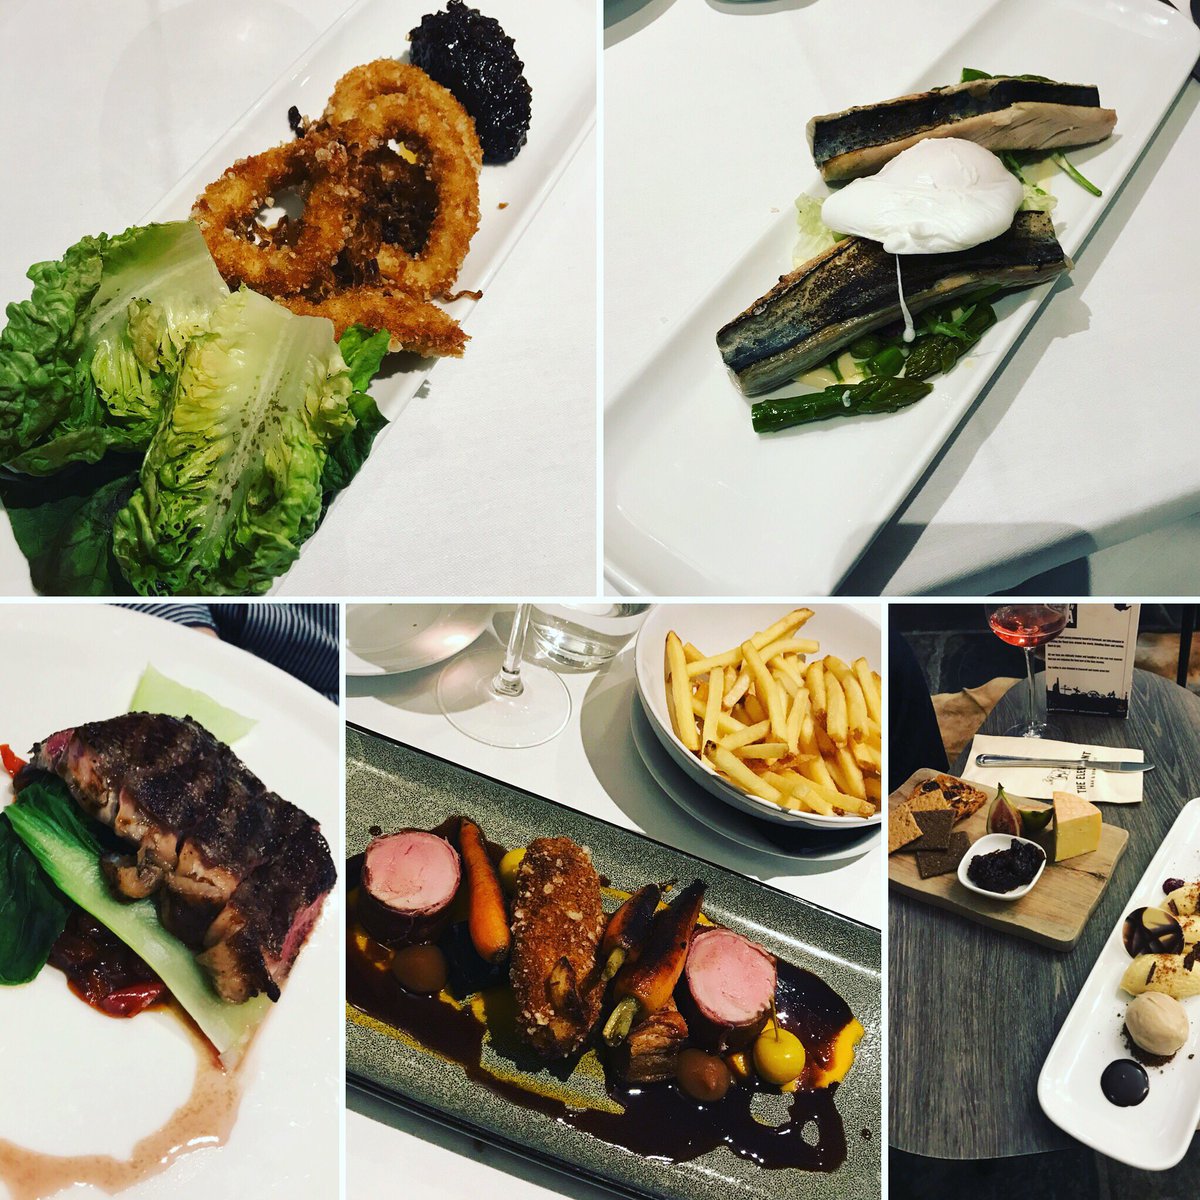 Delicious meal @The_Cornwall last night! #foodie #brasserie #dinnerfor2 #datenight #cornwall